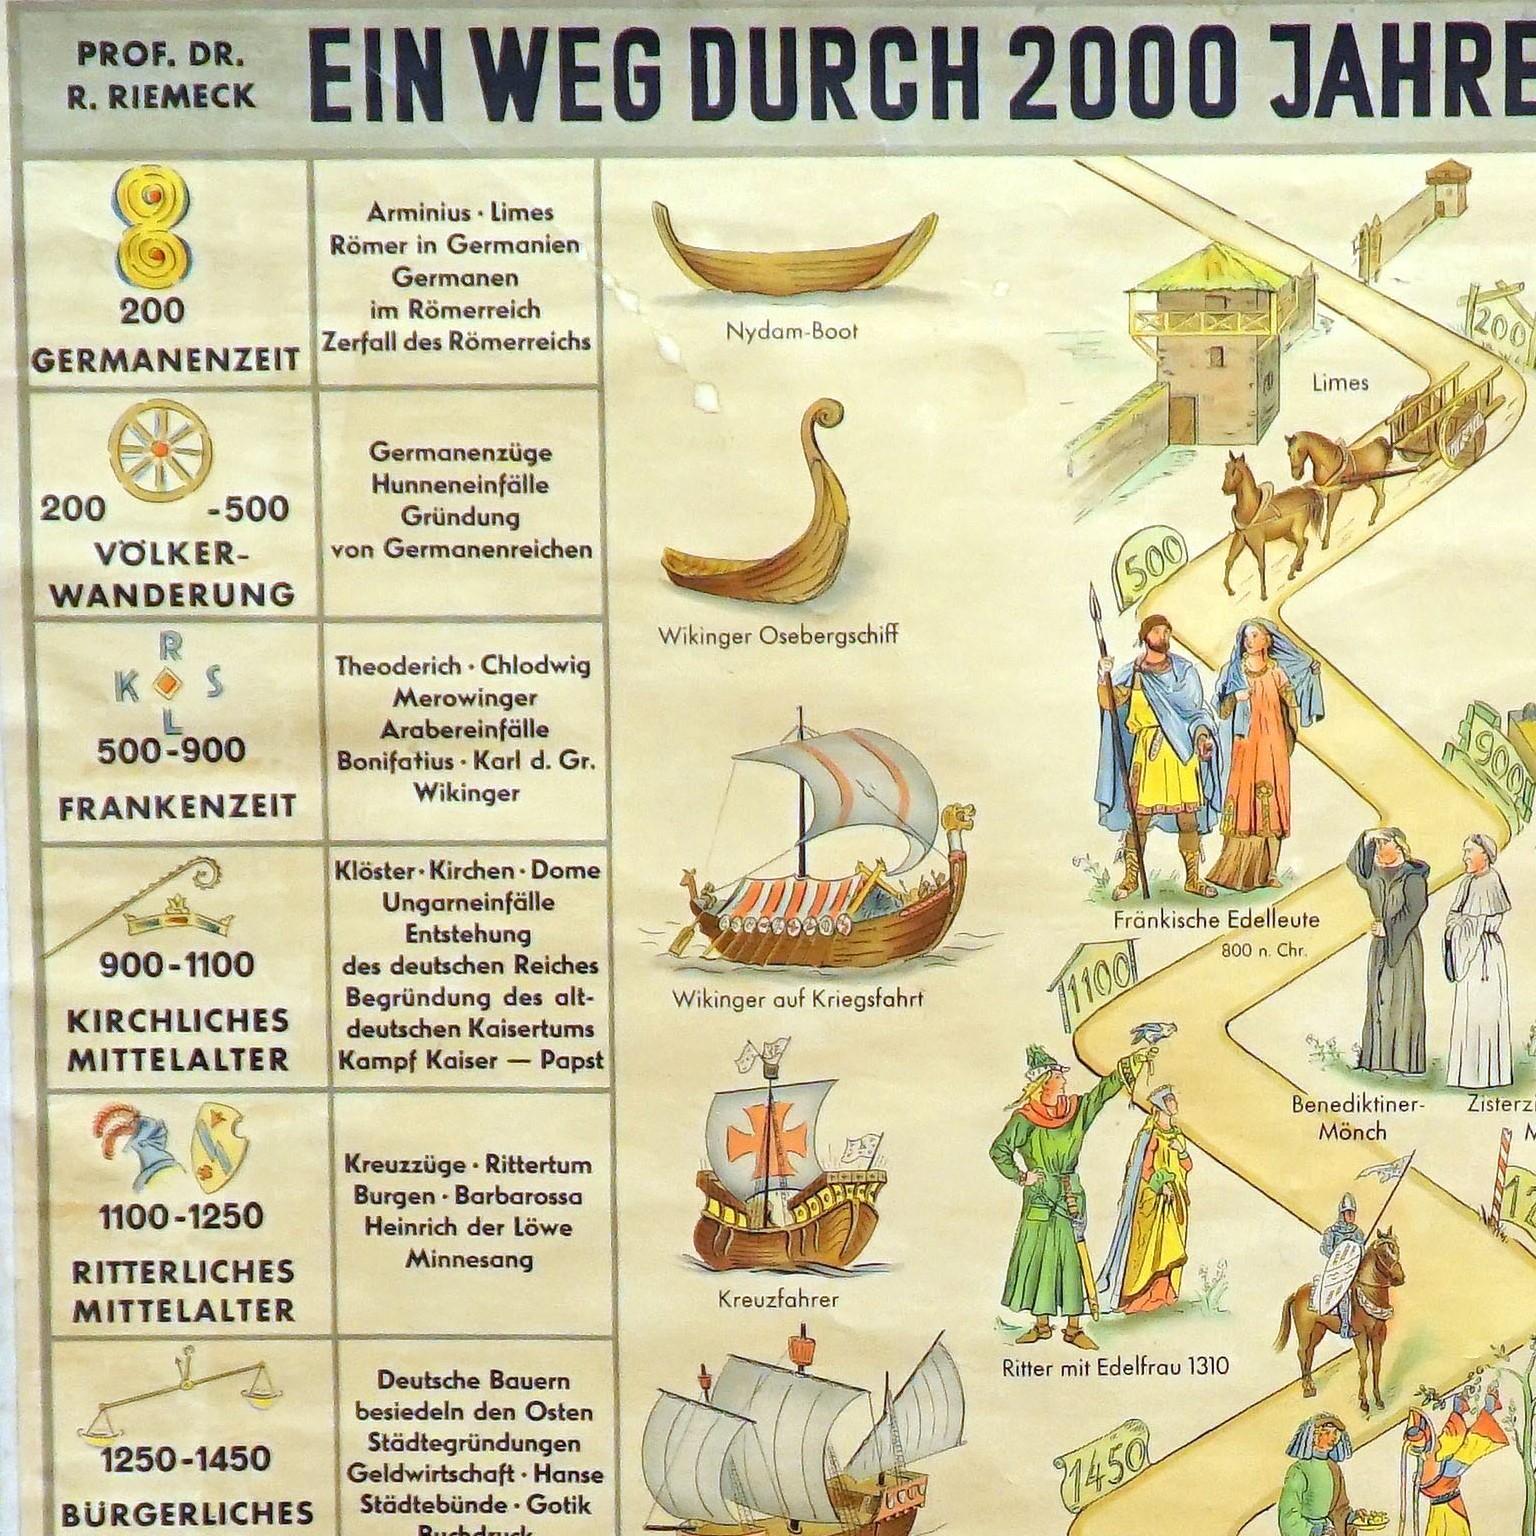 A classical rollable wall chart depicting a way through 2000 years history. Used as teaching material in German schools. Colorful print on paper reinforced with canvas.

Measurements:
Width 100 cm (39.37 inch)
Height 140 cm (55.12 inch)

The